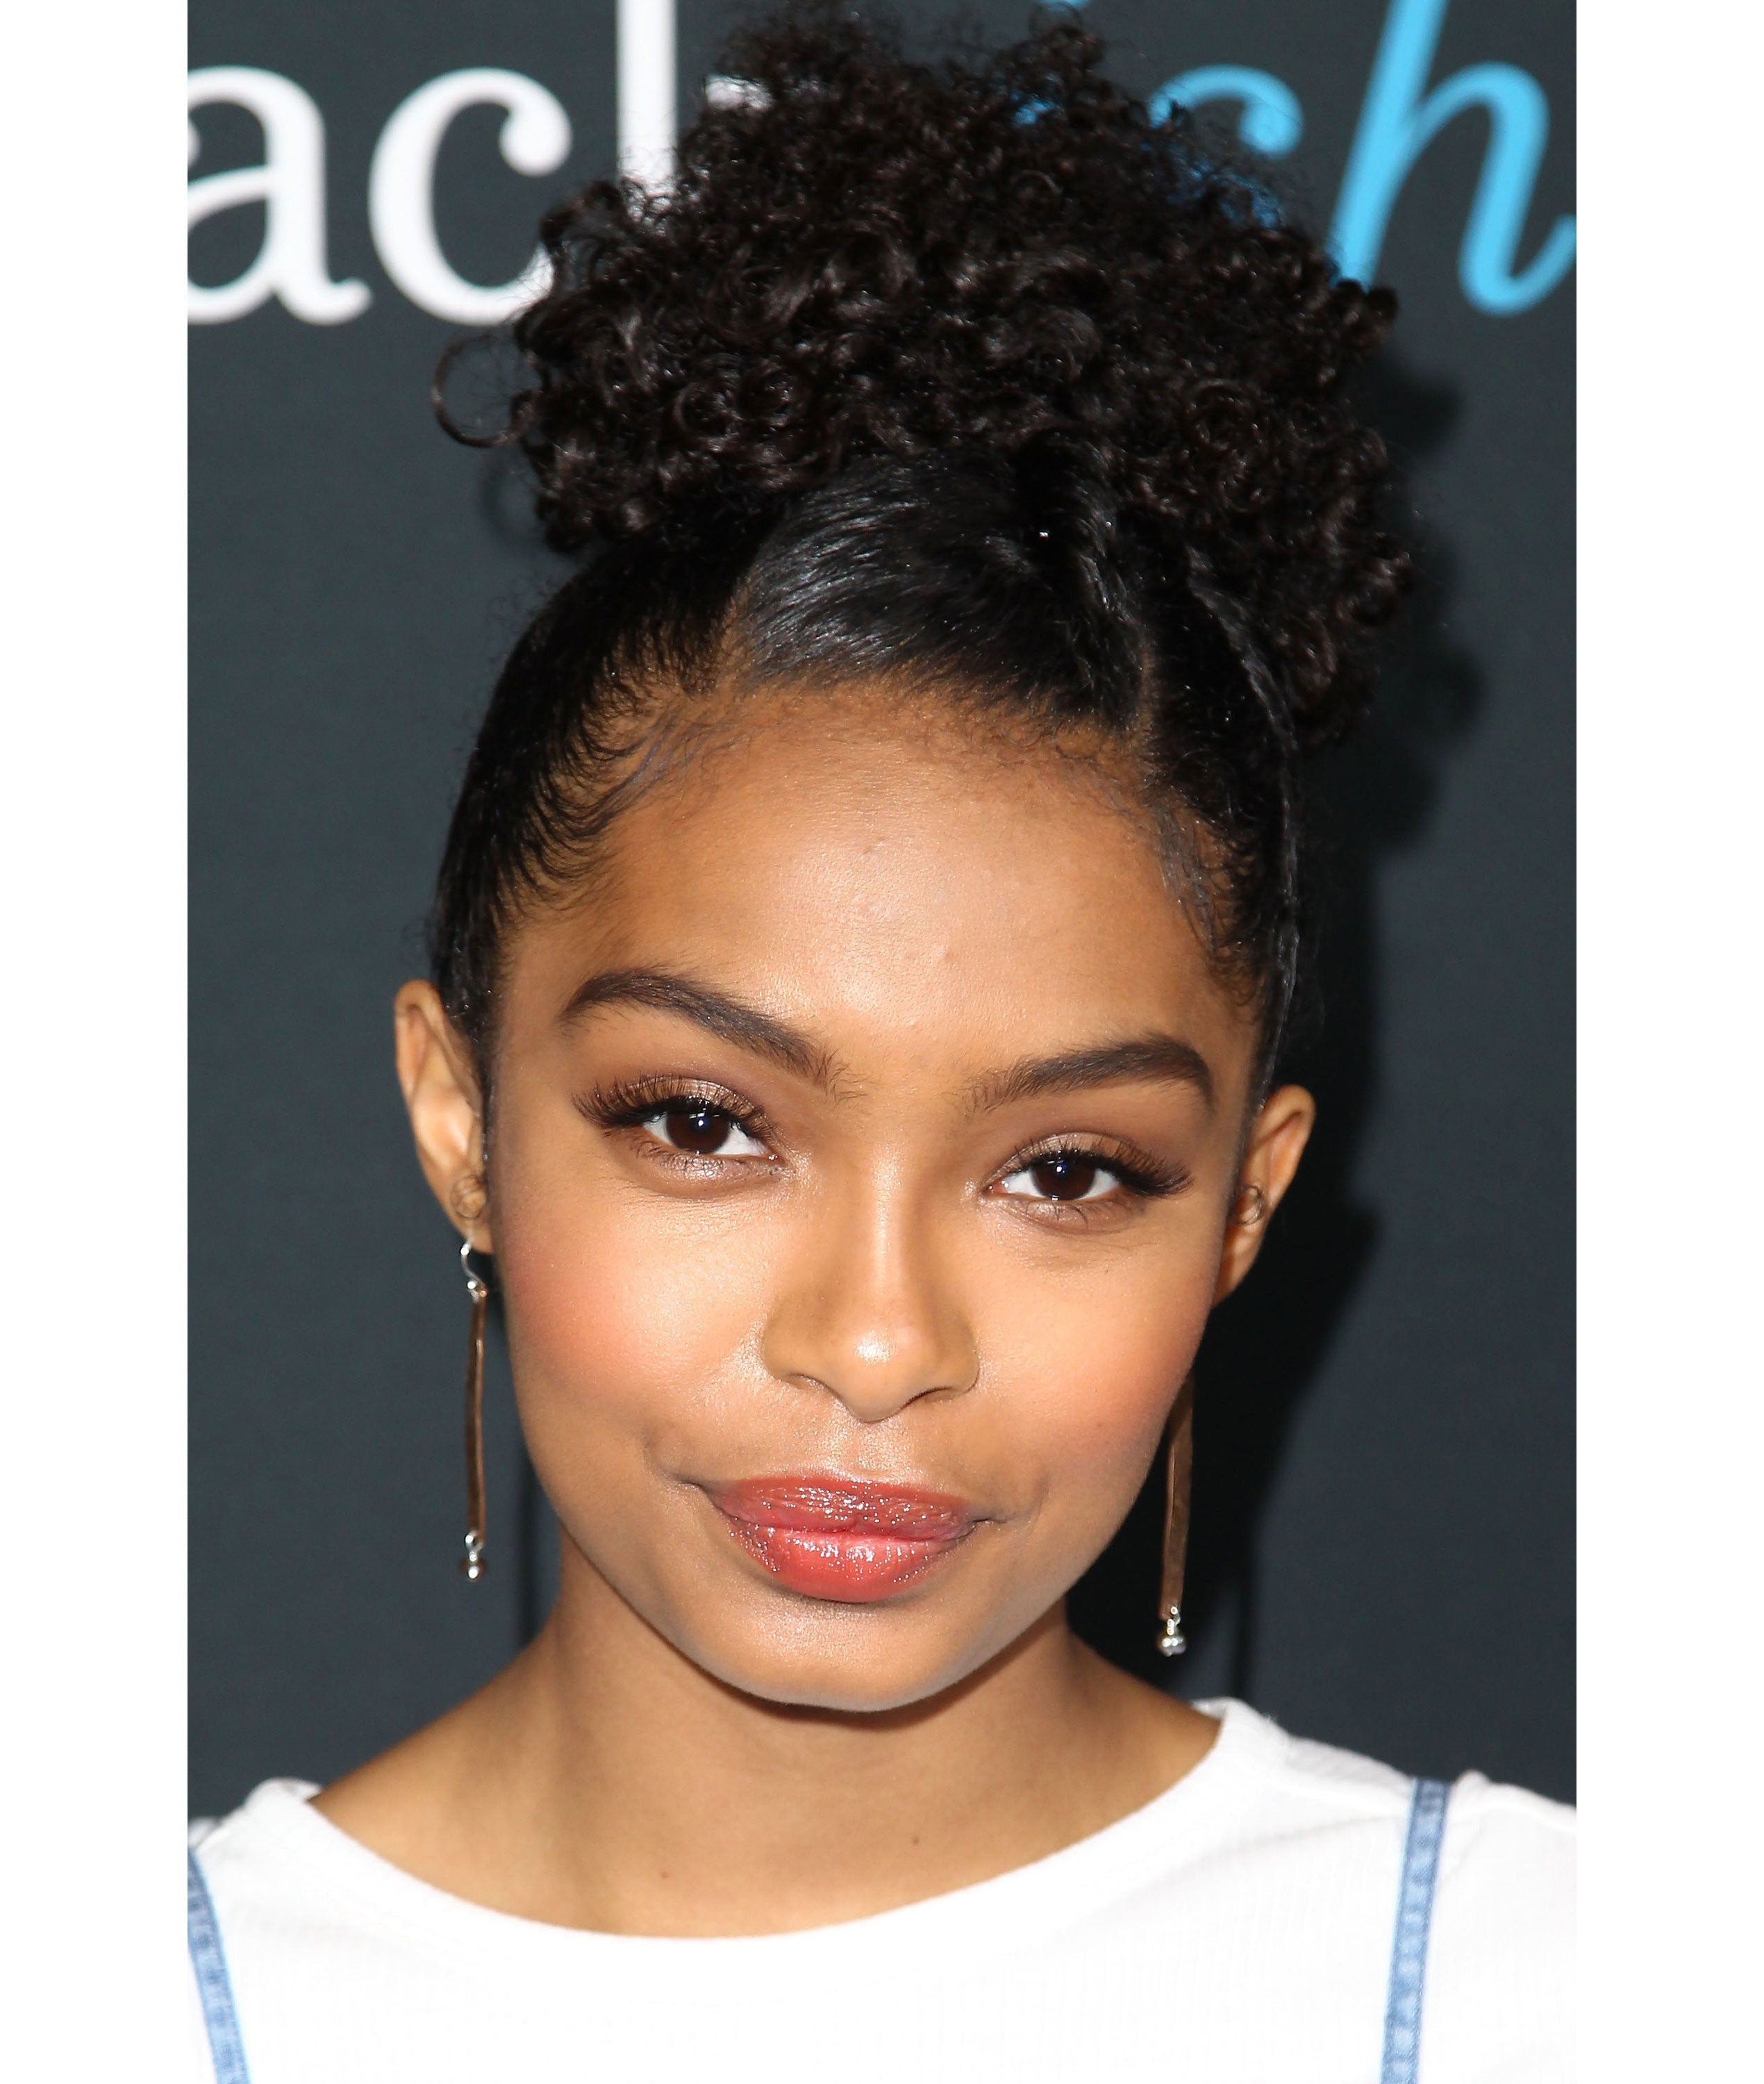 Yara Shahidi Looking For A “Nonexistent Curly Hair Emoji" To Rep Her Hair
